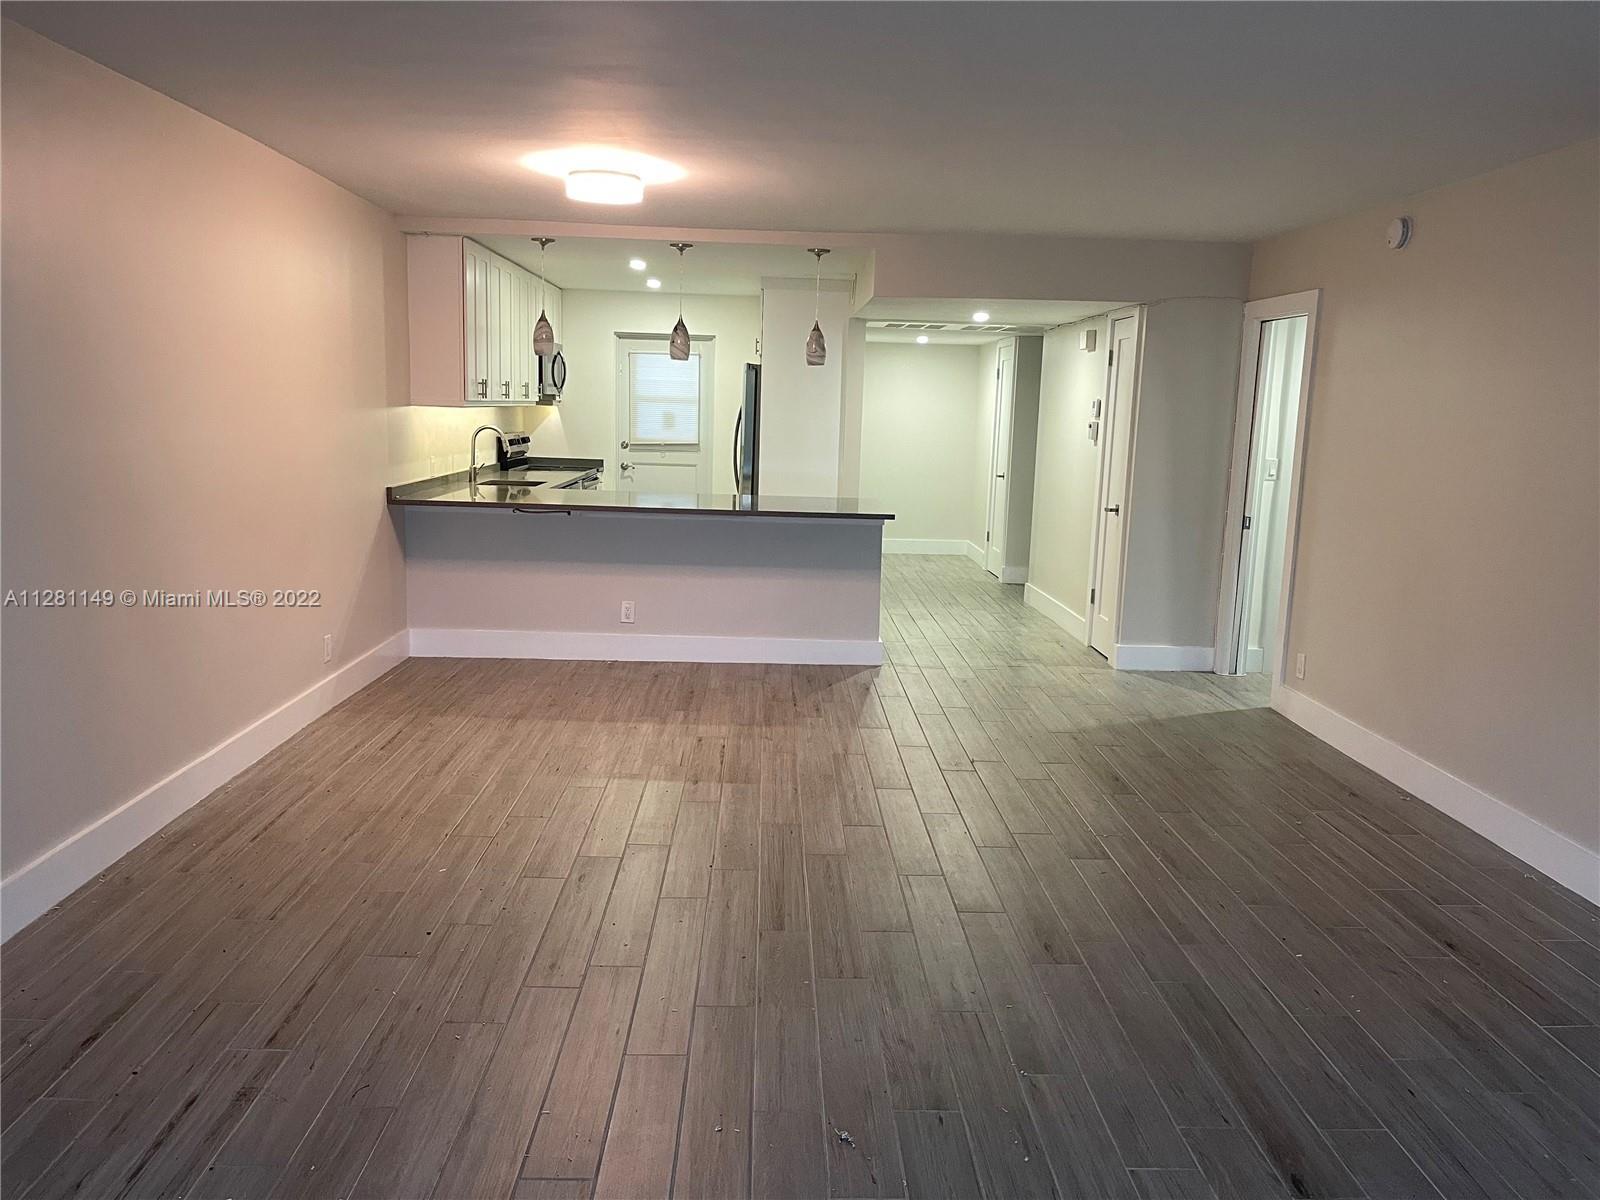 Affordable Luxury Living awaits you at Palm-Aire Country Club Condominiums. This spacious 3/2 end un